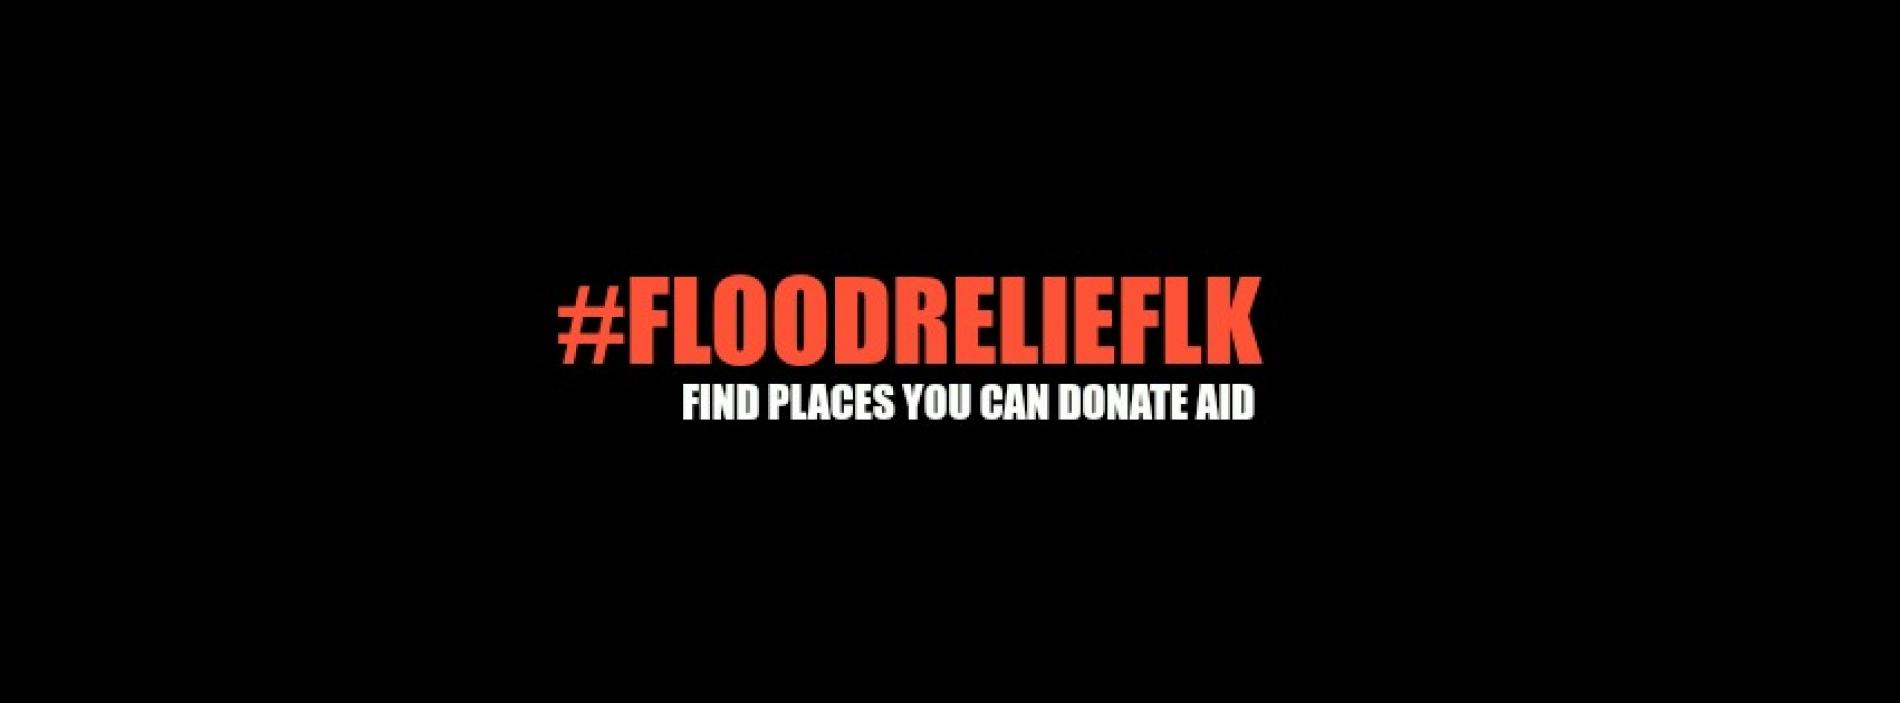 #FloodReliefLK – Places You Can Donate Aid To